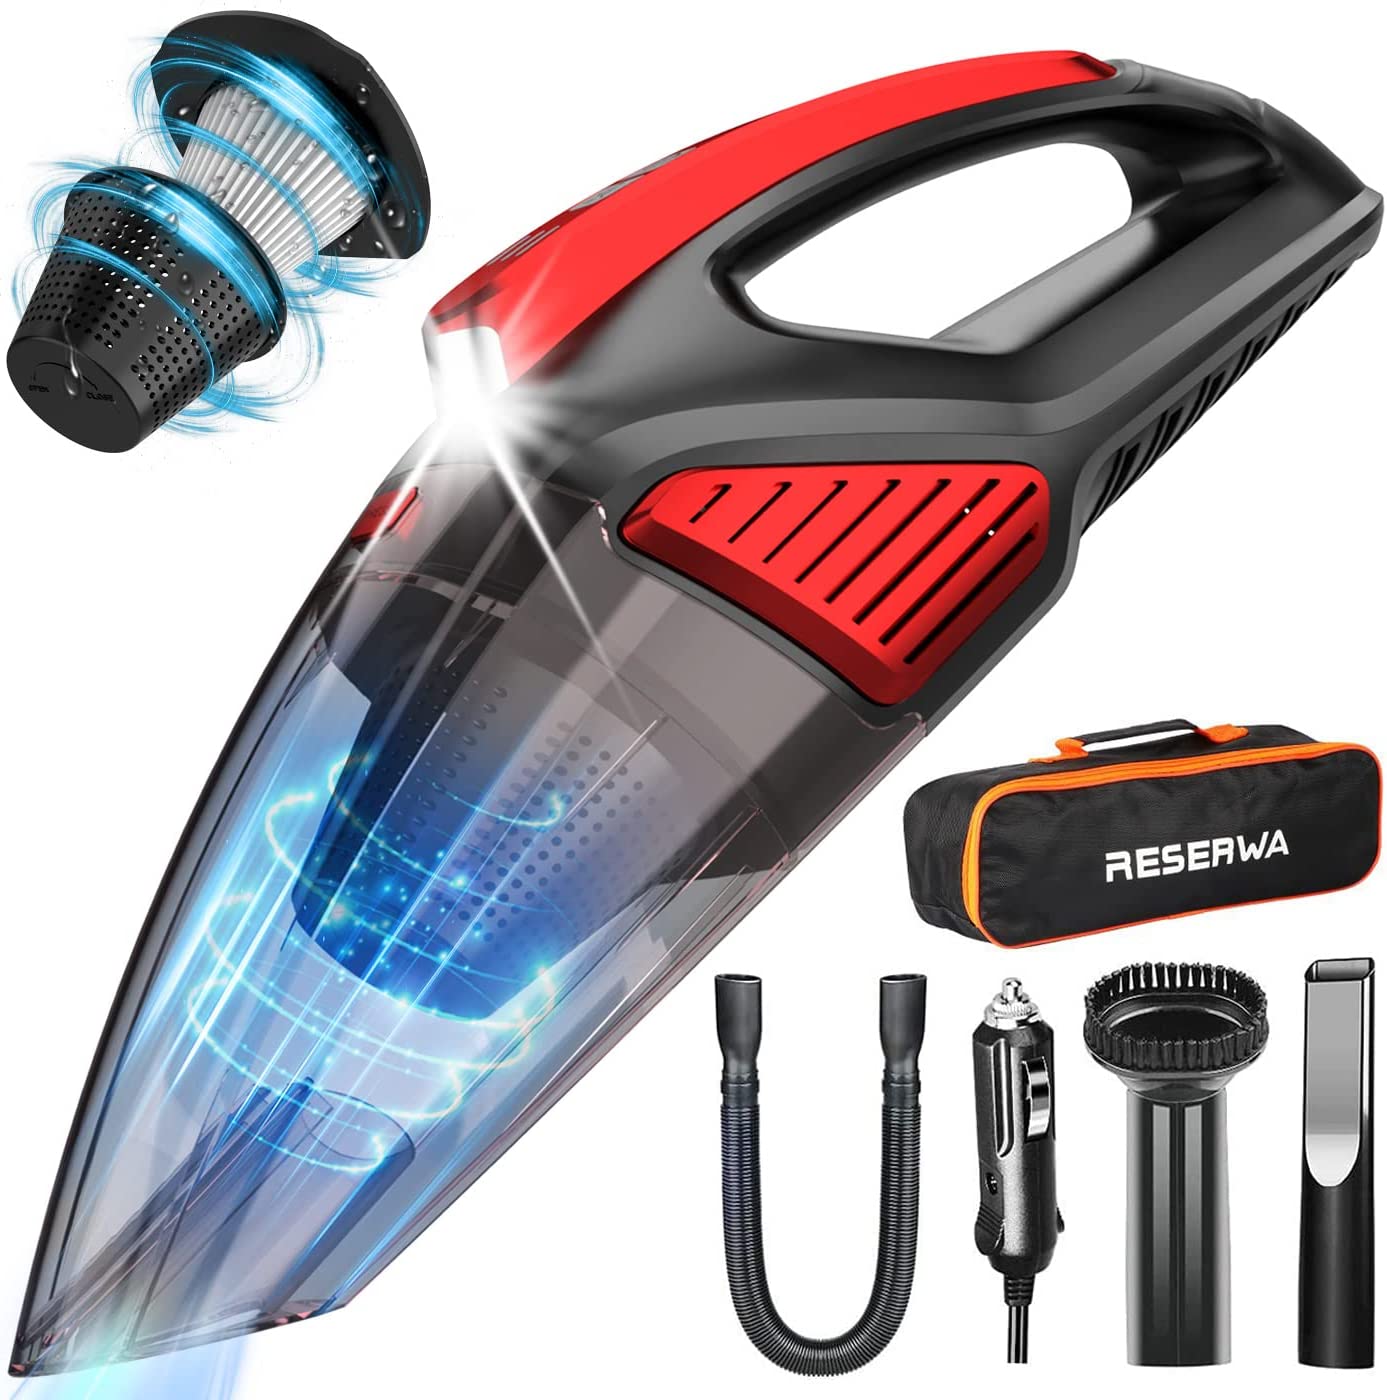 Two-Layer Filter Portable Car Vacuum Cleaner with LED Light 7500PA 12V 16.4FT Cable-Wet and Dry Use